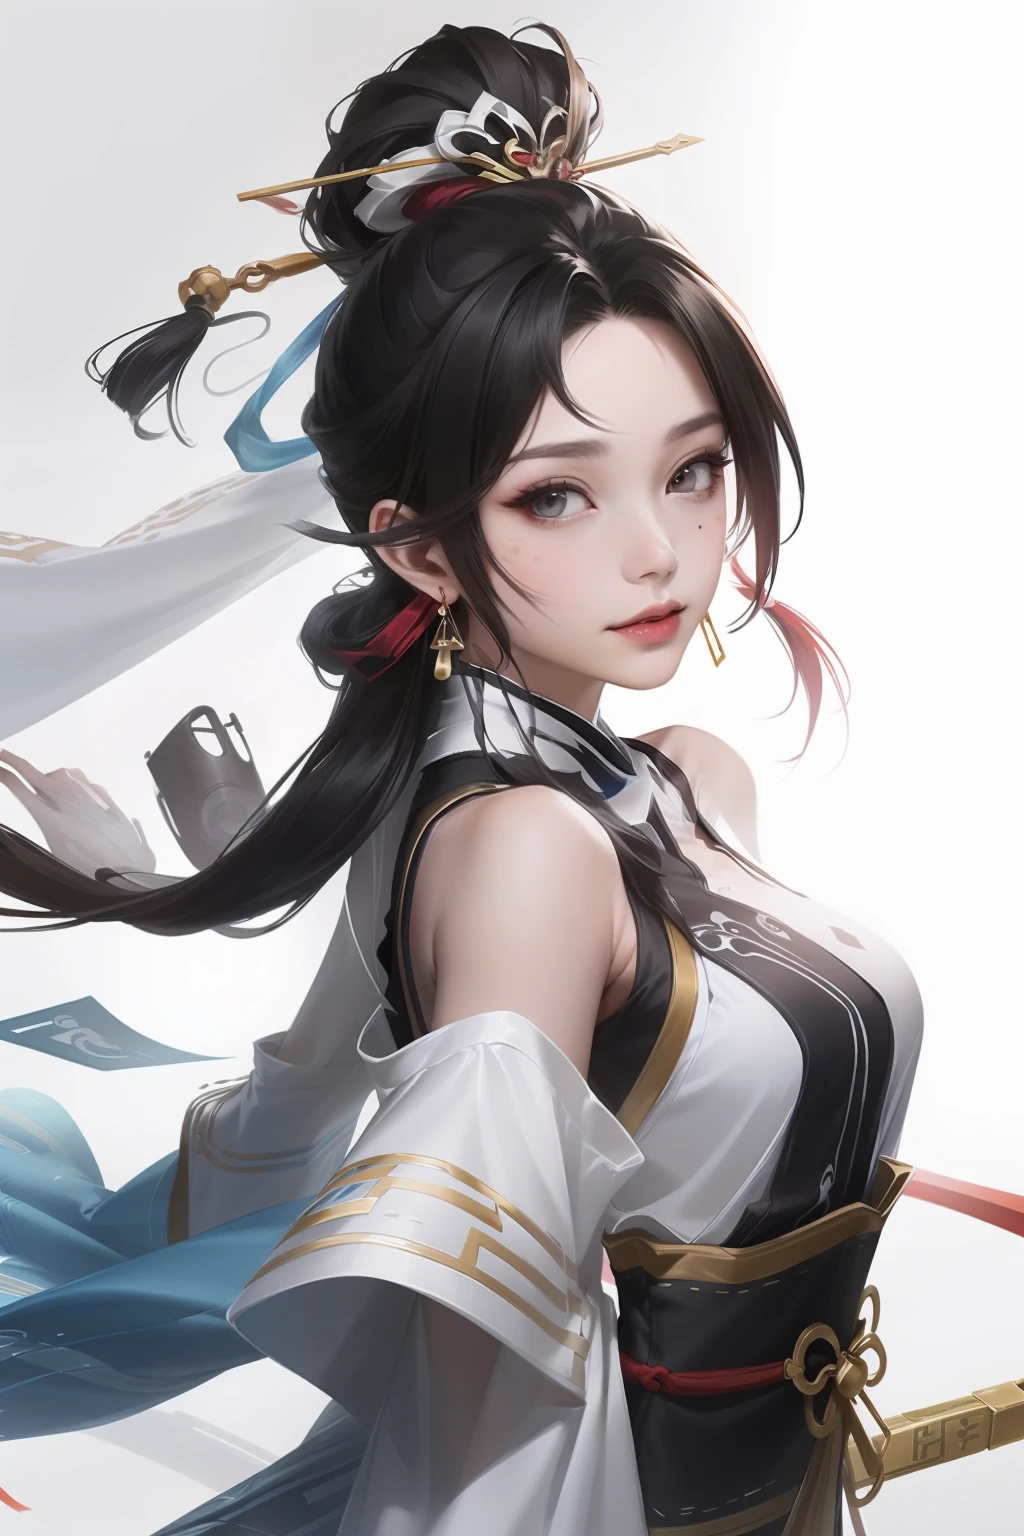 (Masterpiece, Top Quality, Best Quality), ((Wuxia World, Xiuxian, Chinese Wuxia,)), (1 Girl Solo), (Gentle Eyes), (Hanfu, Tulle Streamer), (Hairpin, Long Black Hair), (Hanfu), Light Pink Lips, (Young), Earrings, White Skin, (Clear Facial Features, Detailed Skin Texture, Beautiful Face, Facial Highlight, Above Legs), White Background, Standing, Facing the Viewer, Slim Figure, Color Ink Painting, Splash Color, Sketch, Denoise, Splash Ink, 8k UHD, DSLR, soft light, high quality, high resolution, (very detailed CG unity 8k wallpaper)